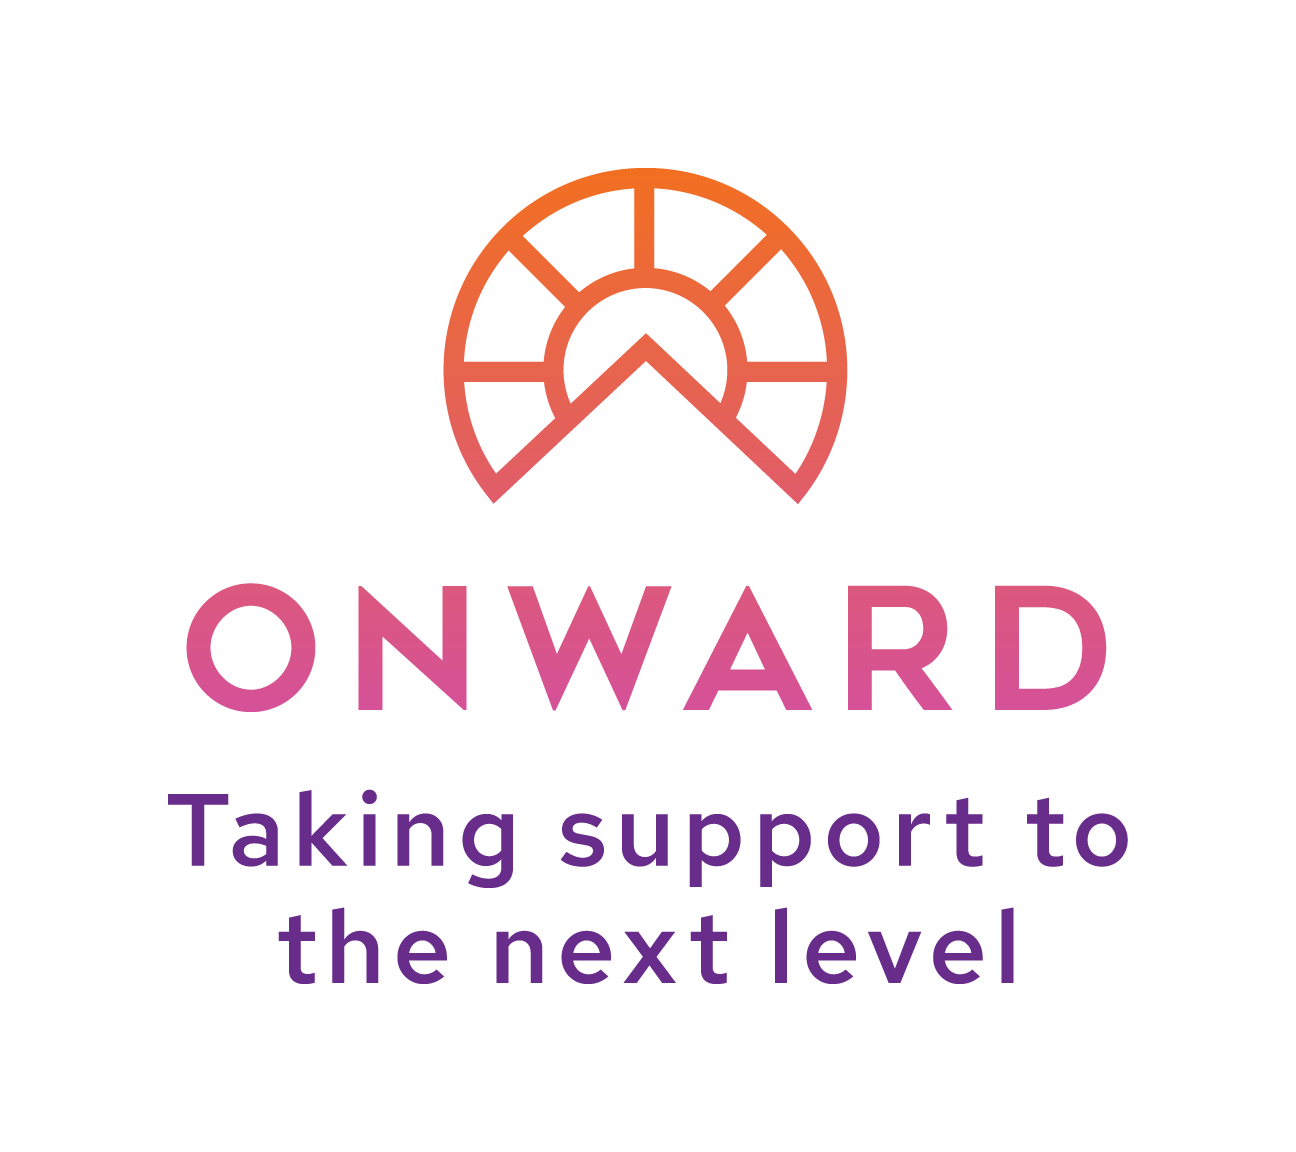 ONWARD™ Taking support to the next level logo.